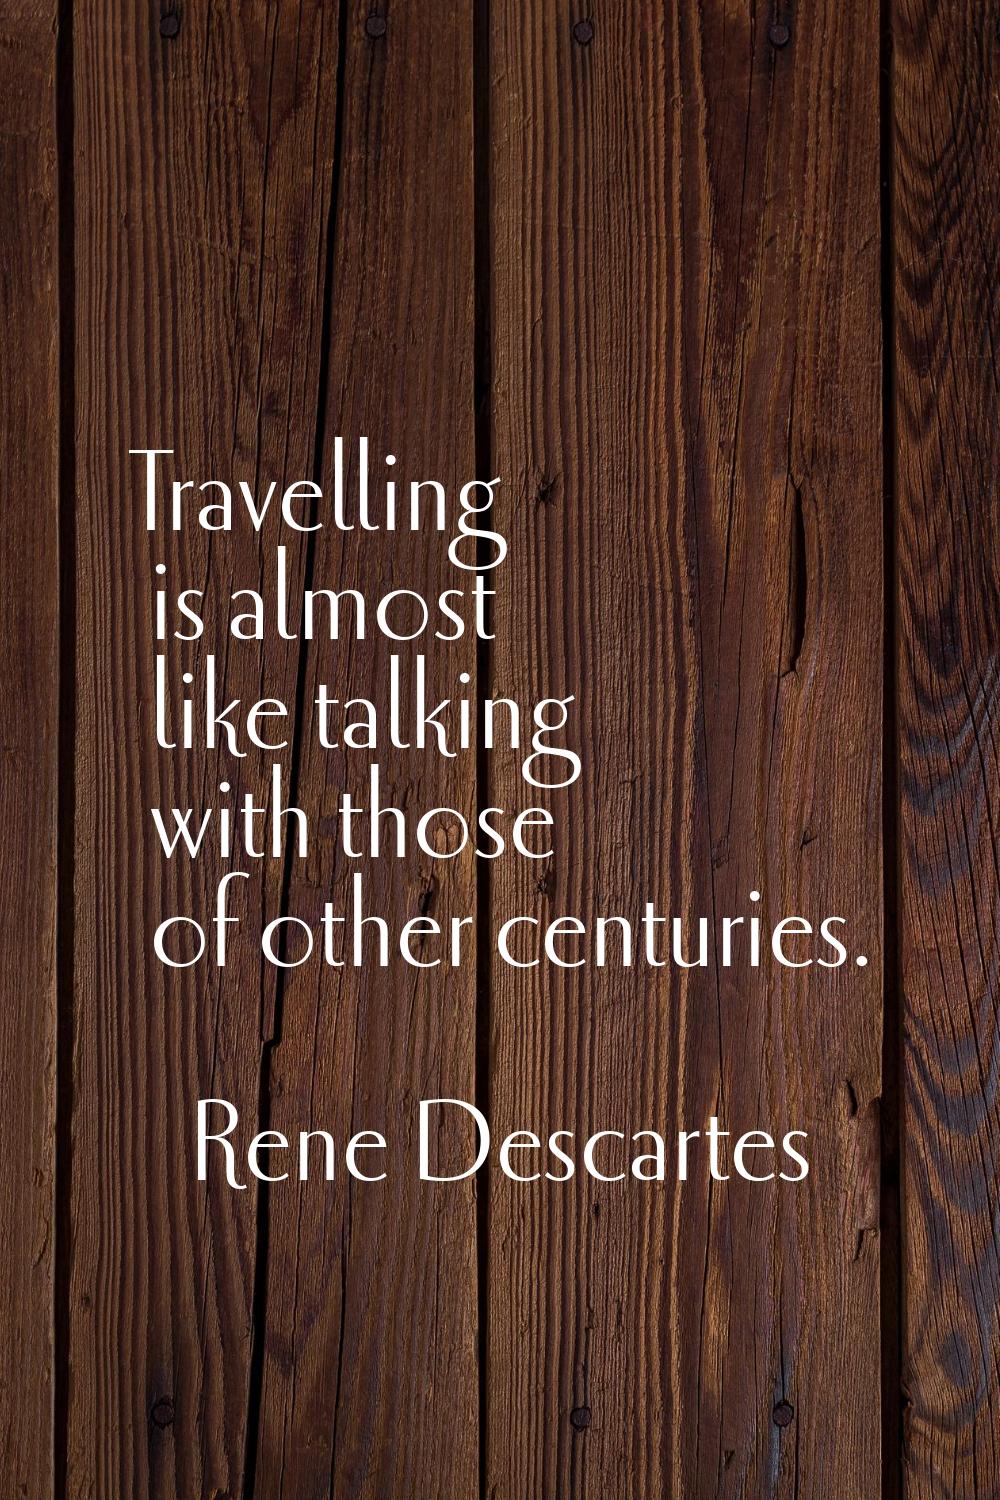 Travelling is almost like talking with those of other centuries.